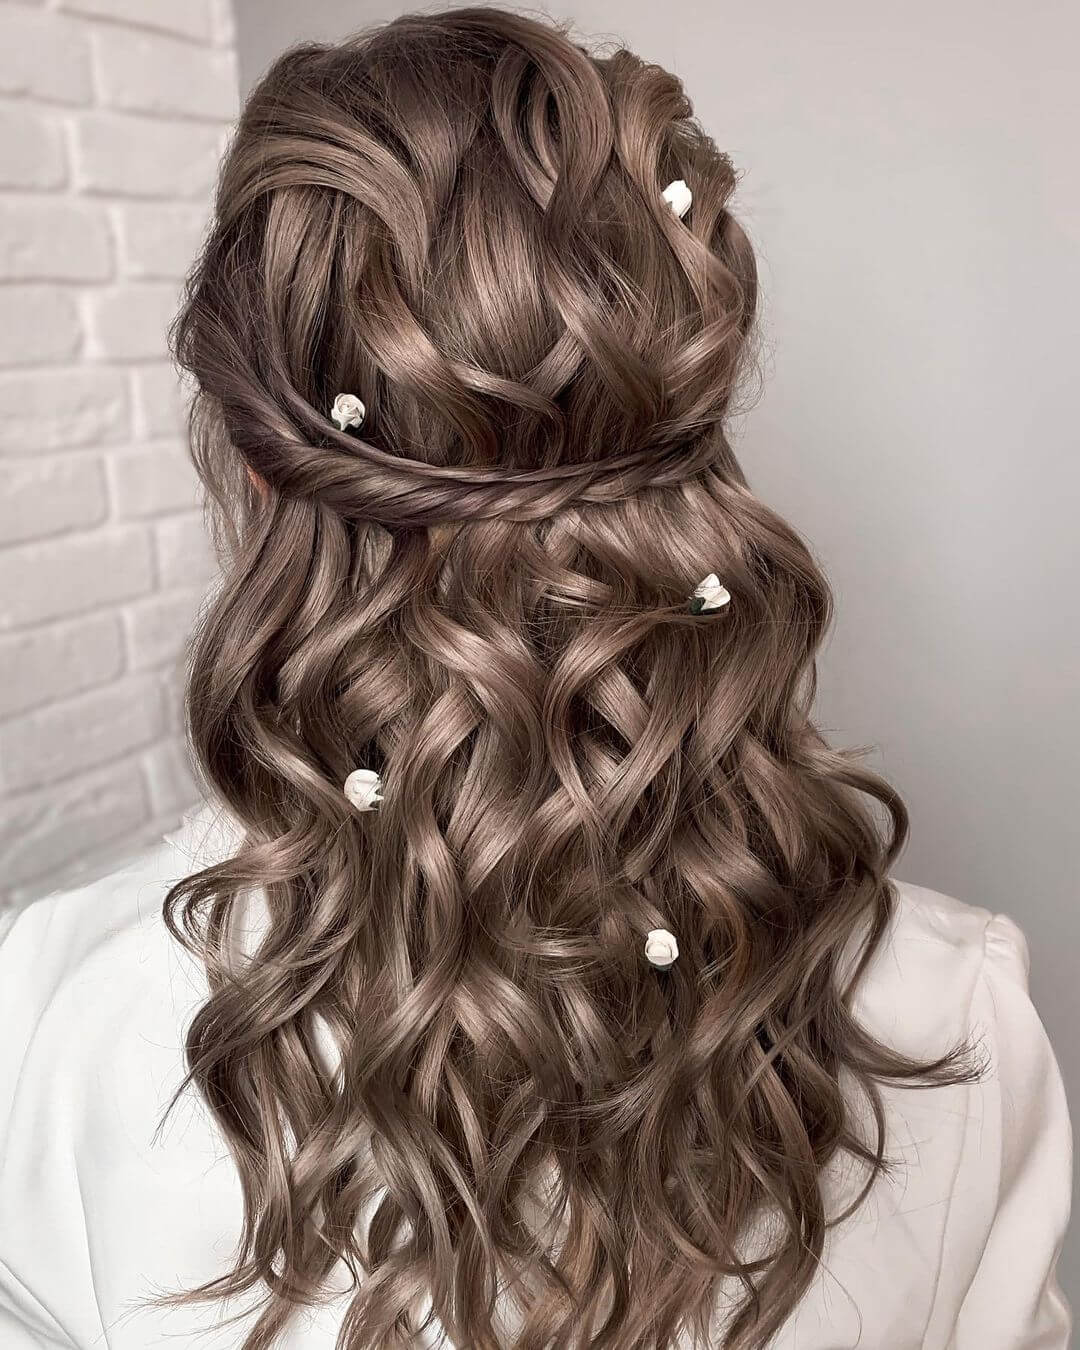 Beautiful Open Hair with Flower Decorations